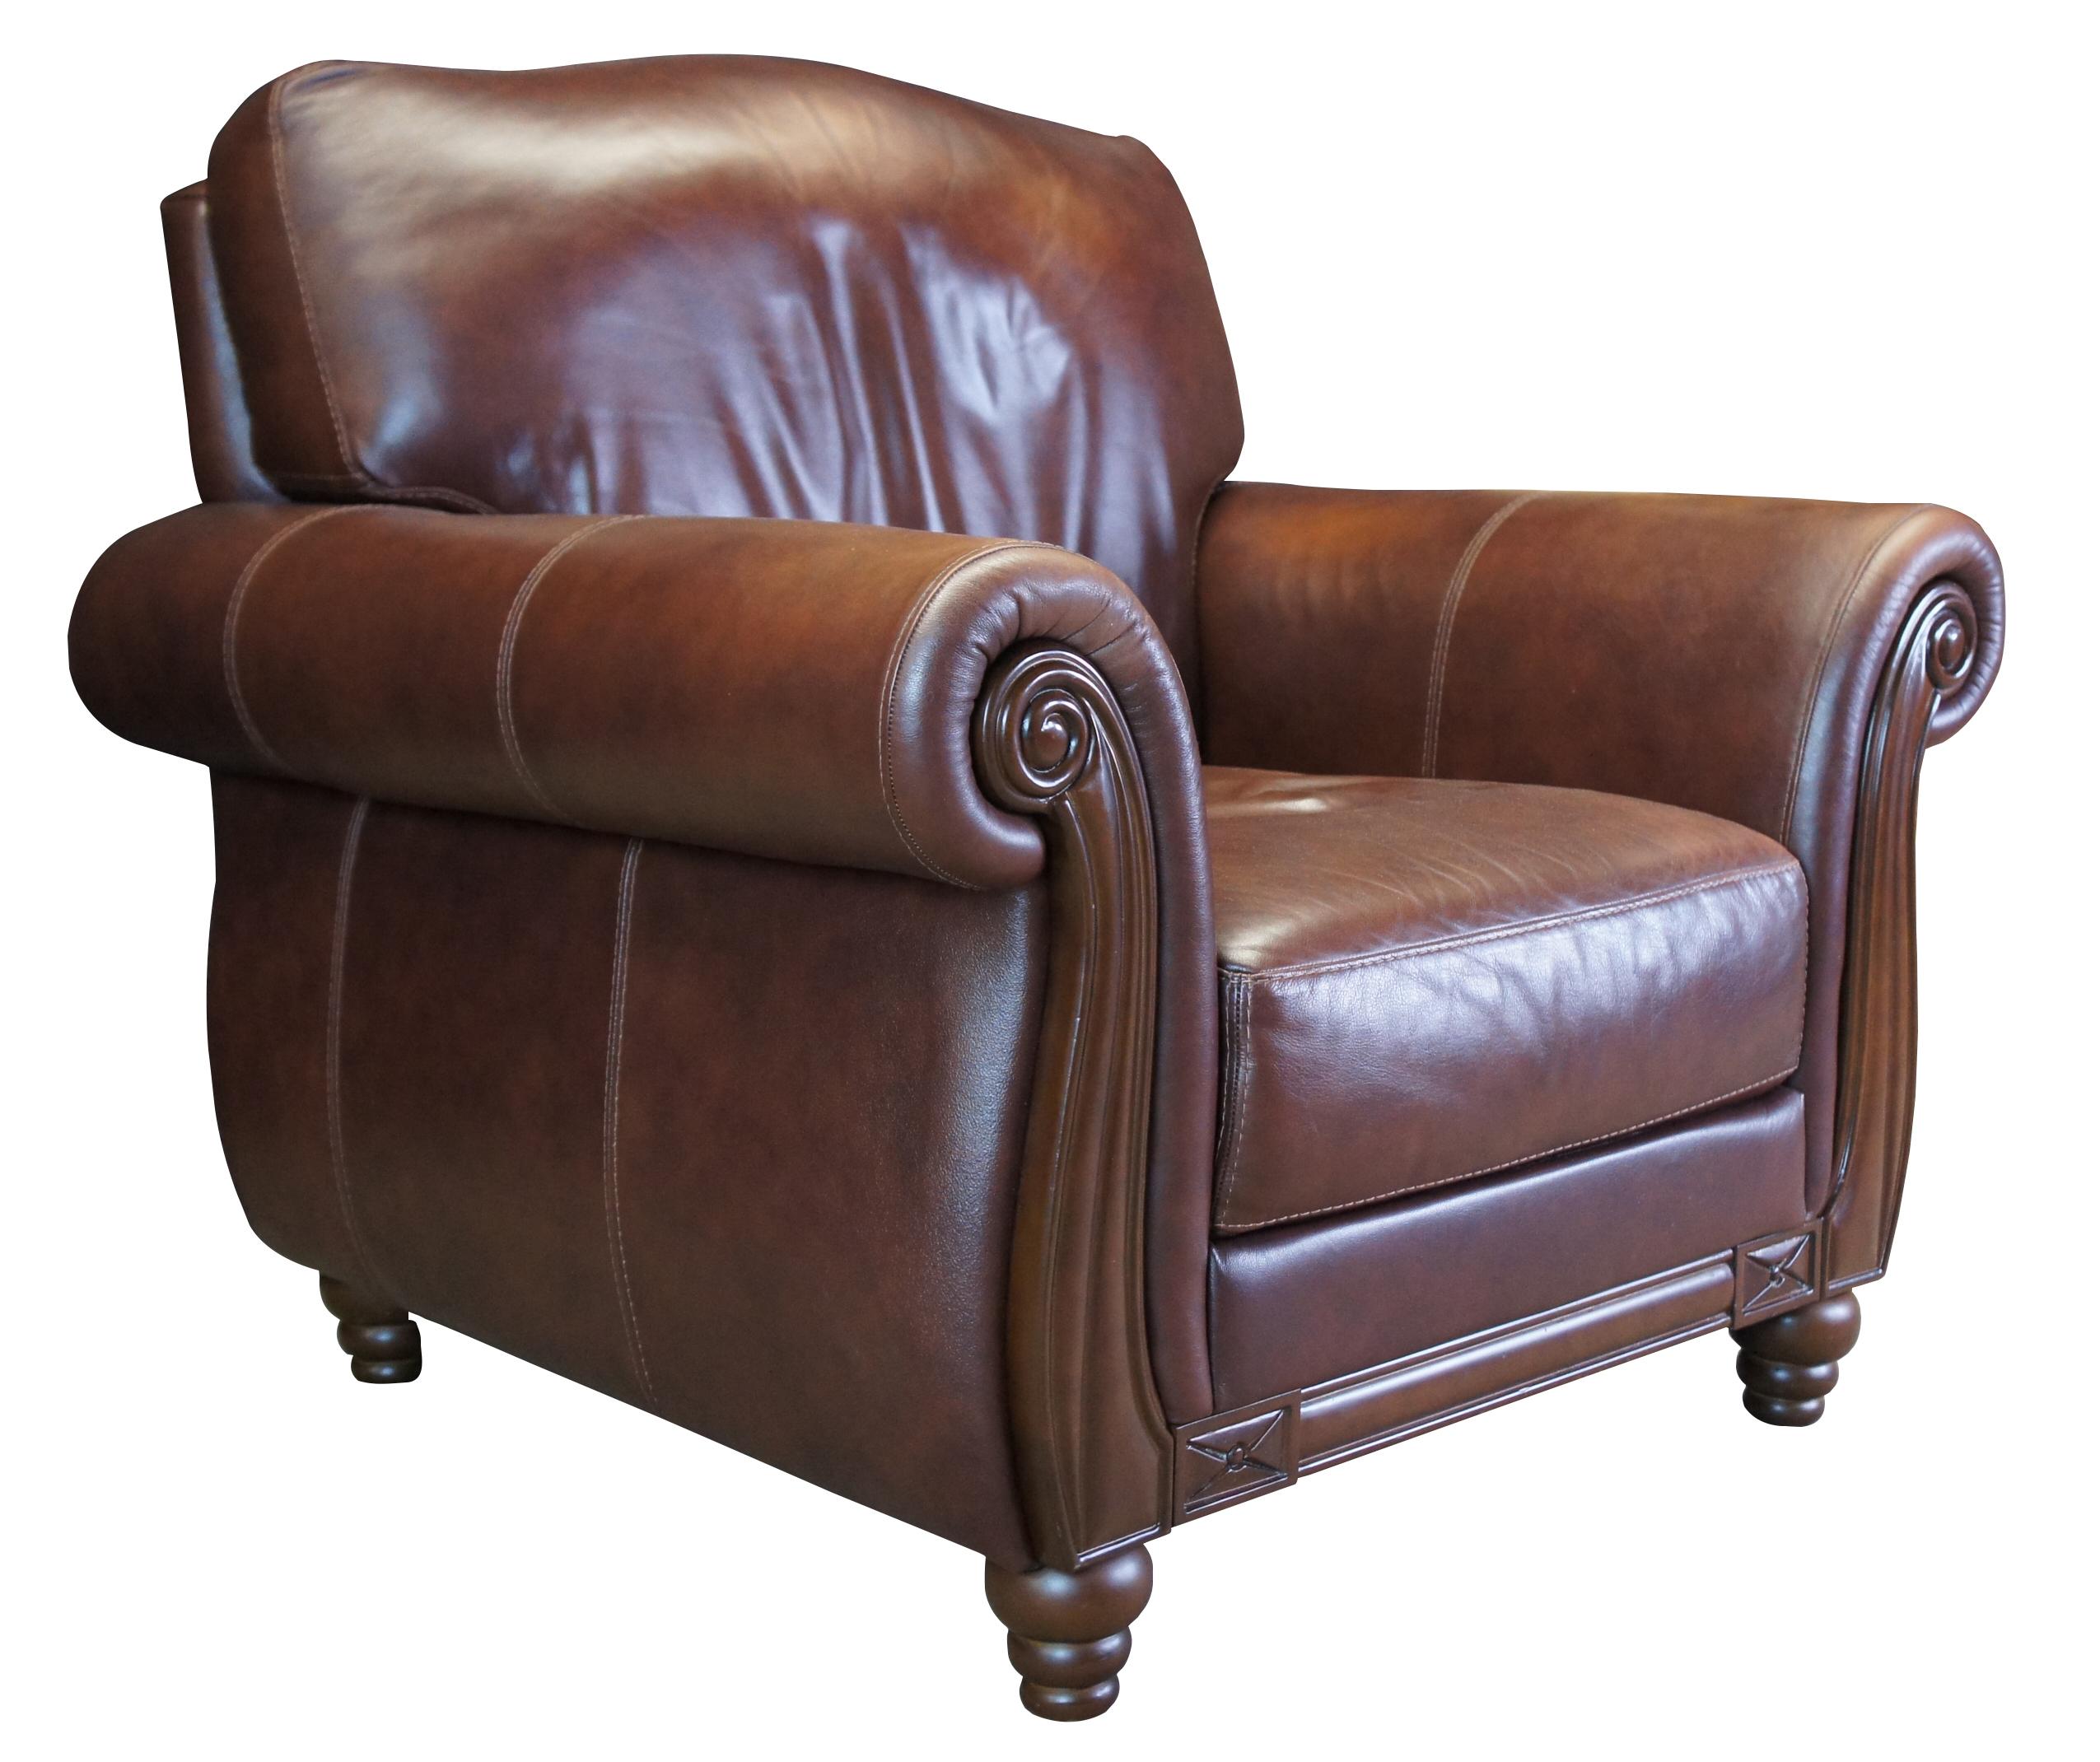 Chateau D'Ax Divani Italian Brown Leather Arm Chair. Features rolled arms, wooden trim and cascading bun feet.

Chateau d’Ax opened its business in 1948 as a result of the Colombo family’s hard work and dedication in
Lentate sul Seveso, a small